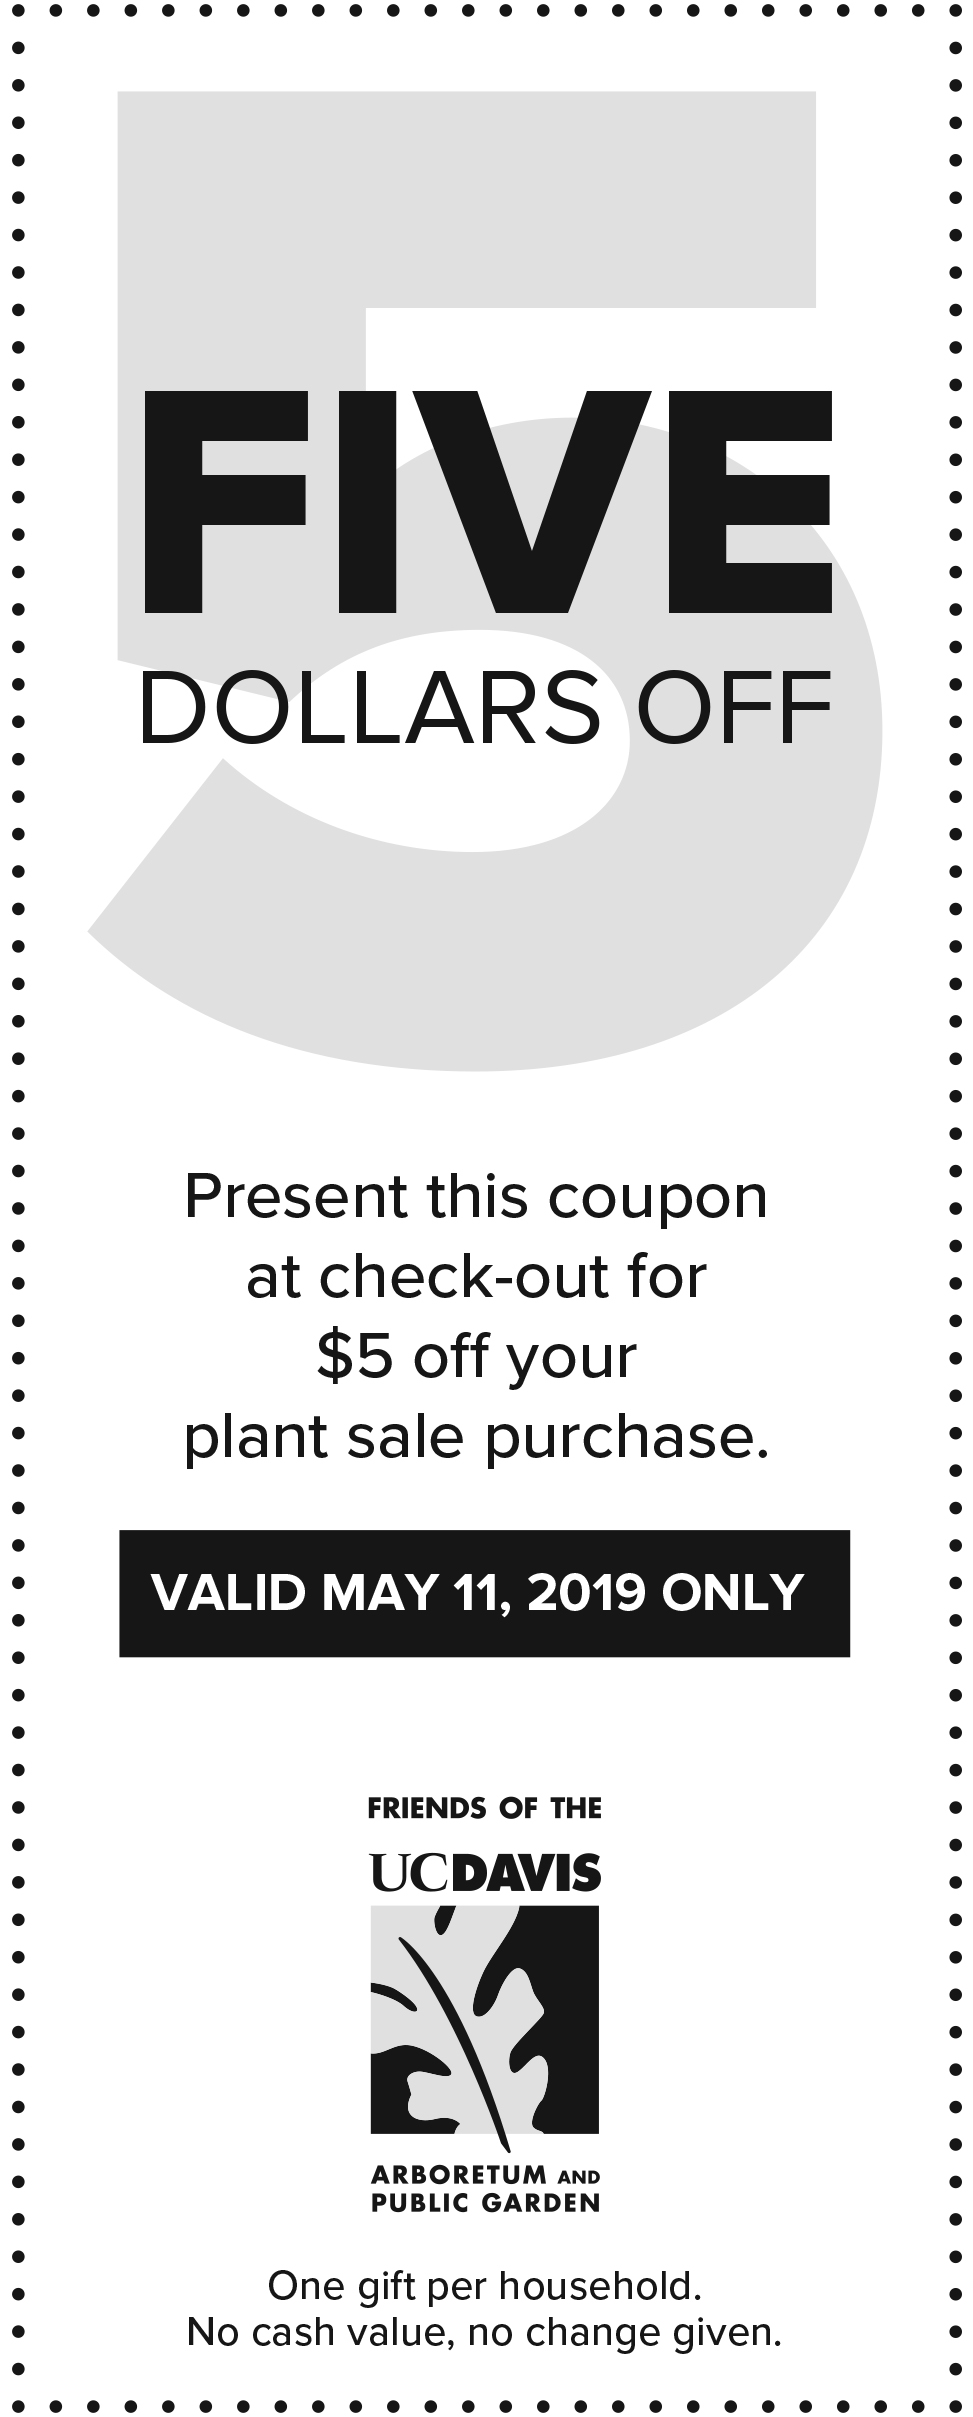 Image of $5-off coupon.